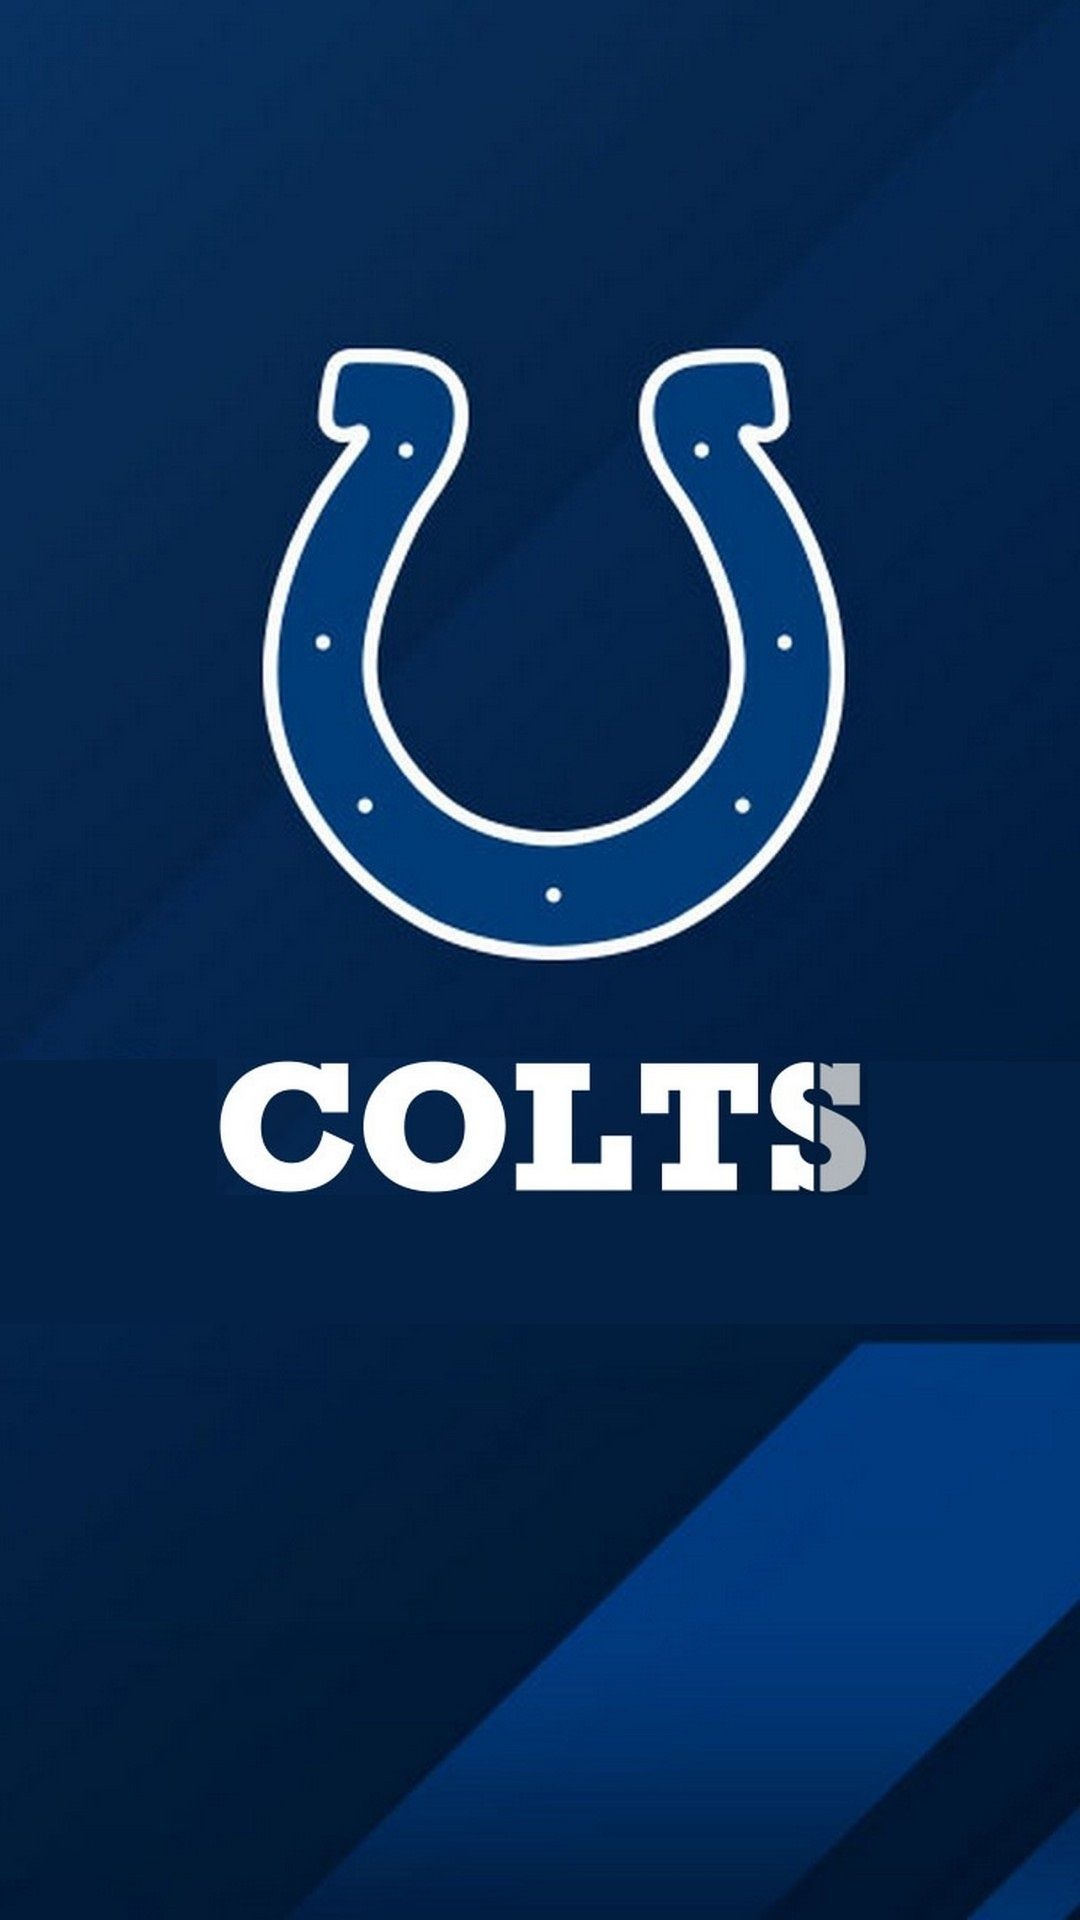 Indianapolis Colts, NFL football, Colts logo, Sports, 1080x1920 Full HD Handy